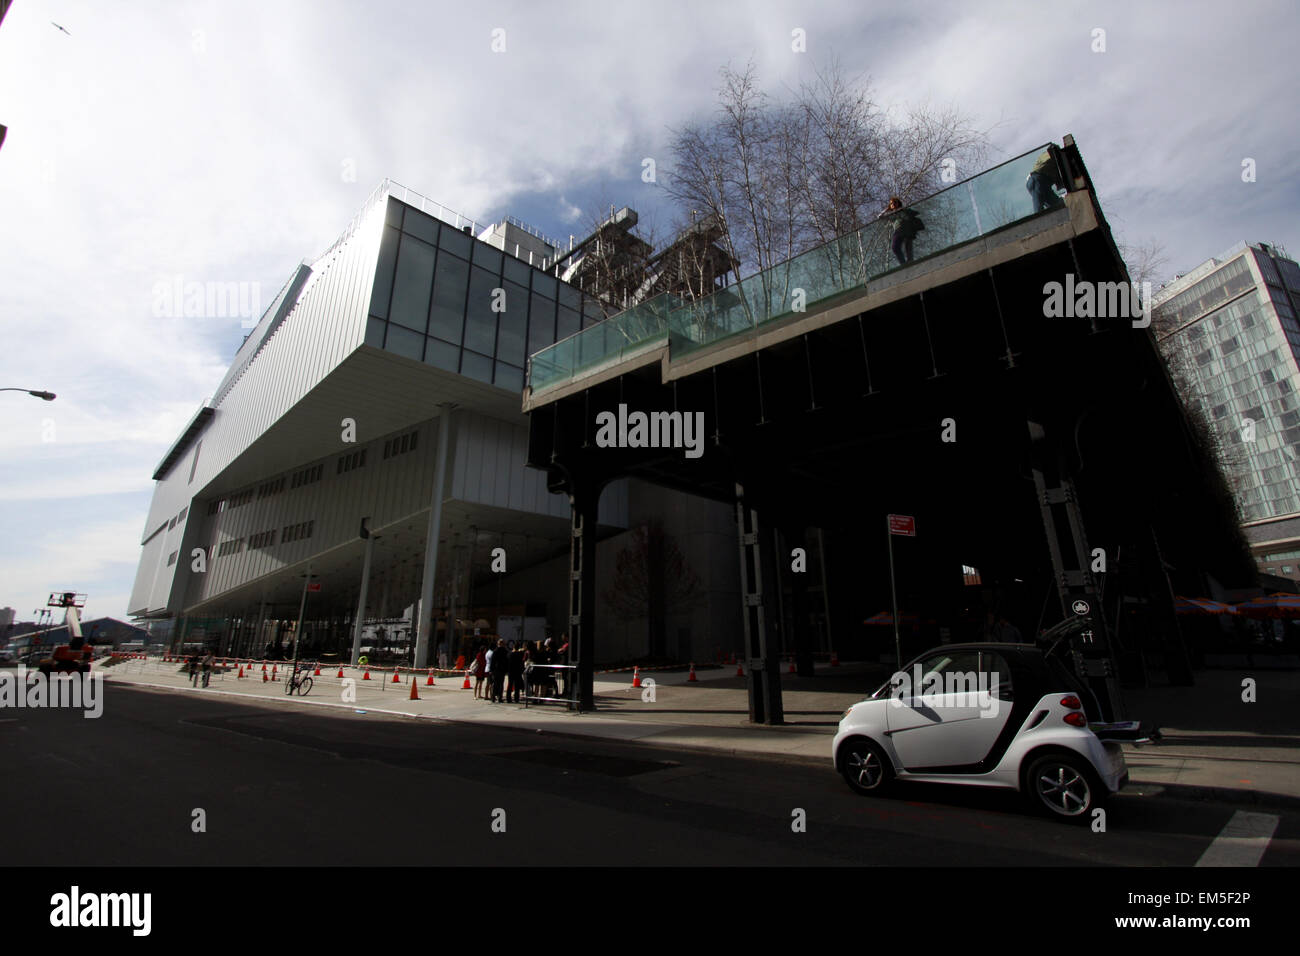 New York, USA. 15th Apr, 2015. Finishing touches are being put on the new Whitney Museum of American Art building at Washington Street and Gansevoort Street, in New York City's Meatpacking District at the end of the High Line, pictured at the right of the frame. Designed by architect Renzo Piano, the 200,000-square-foot space will open to the public on May 1st, 2015        London 2012  - Olympics:   Swimming Practice        London 2012  - Olympics:  Diving Practice.        London 2012  - Olympics:  Swimming Practice. Credit:  Adam Stoltman/Alamy Live News Stock Photo